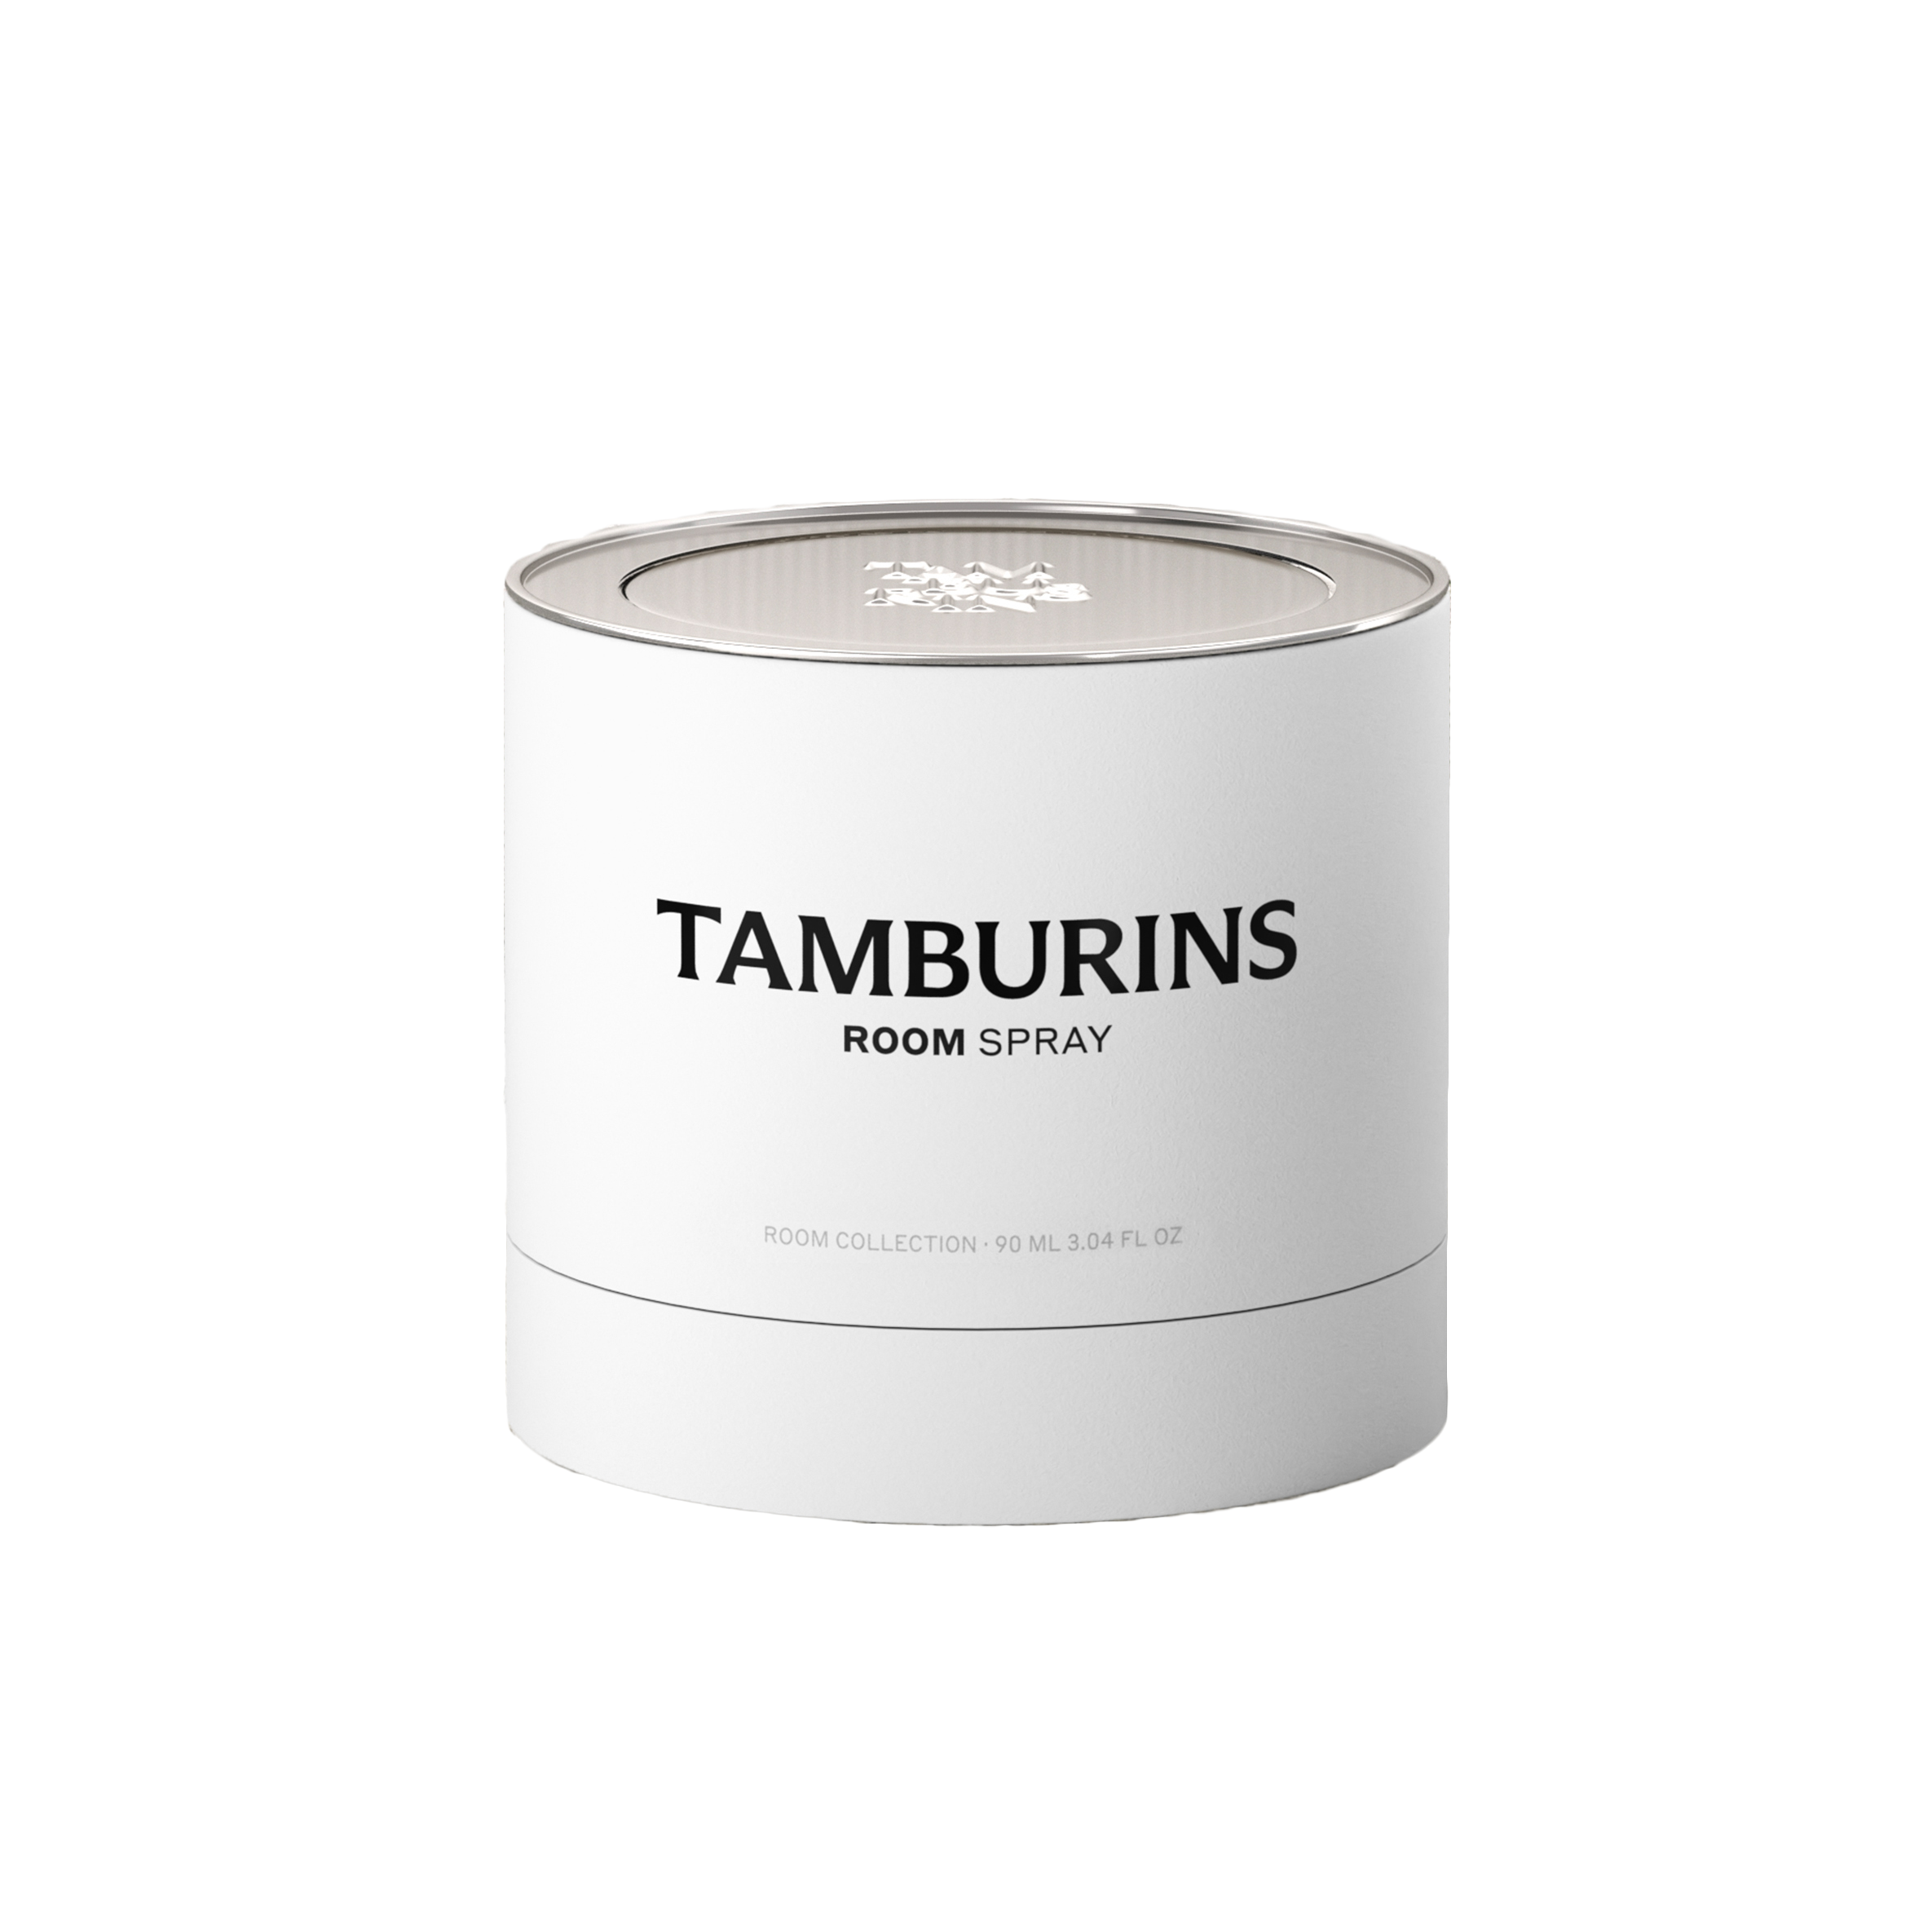 TAMBURINS living room Spray 90ml: A refreshing scent for your living room. Spray away to create a cozy and inviting atmosphere.